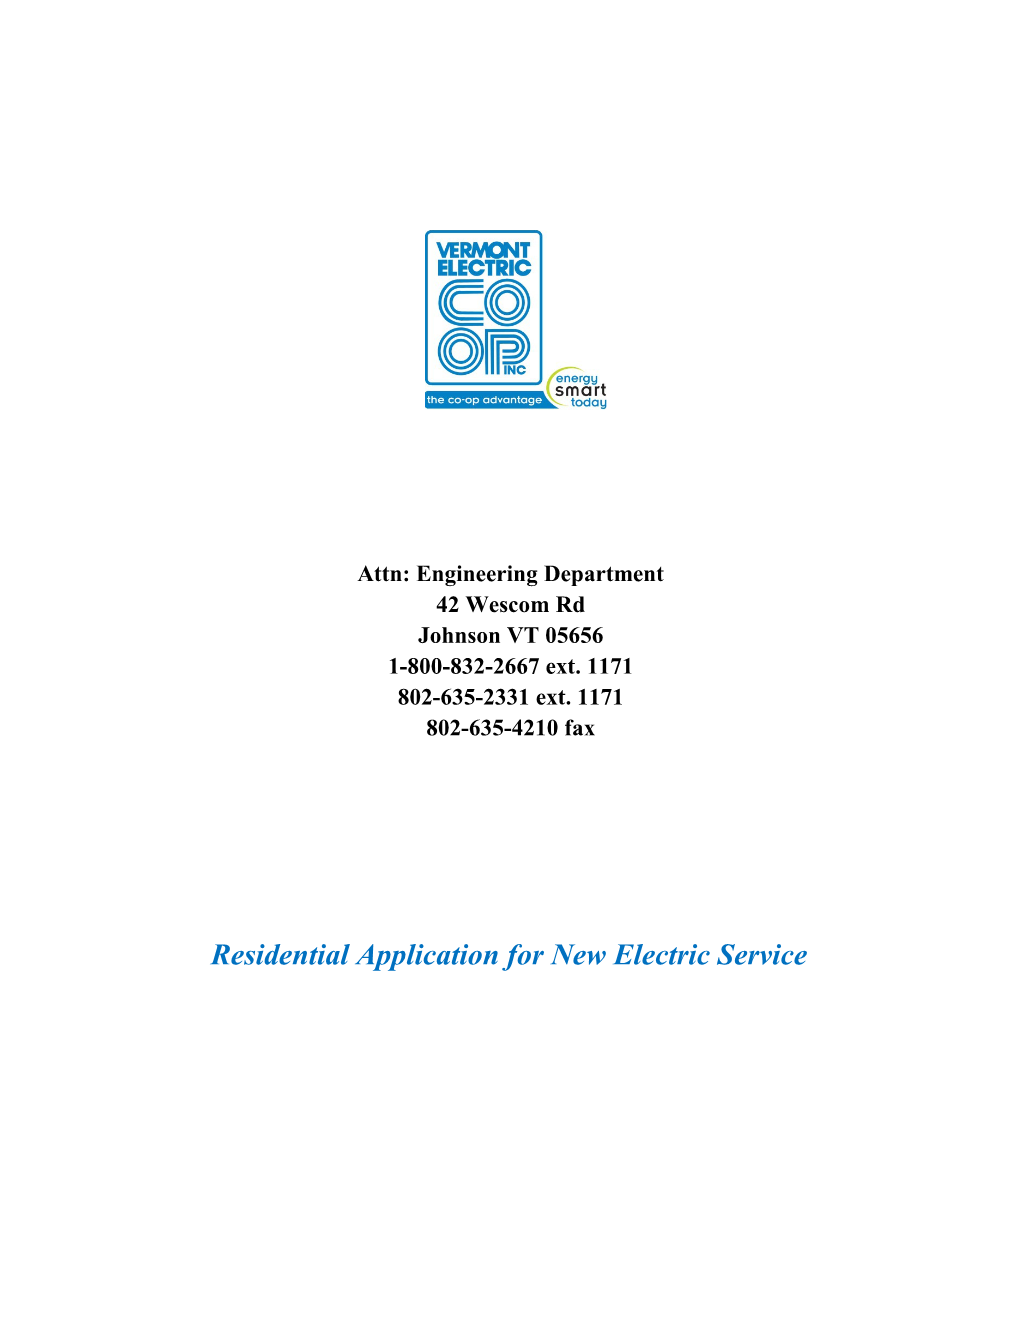 Residential Application for New Electric Service